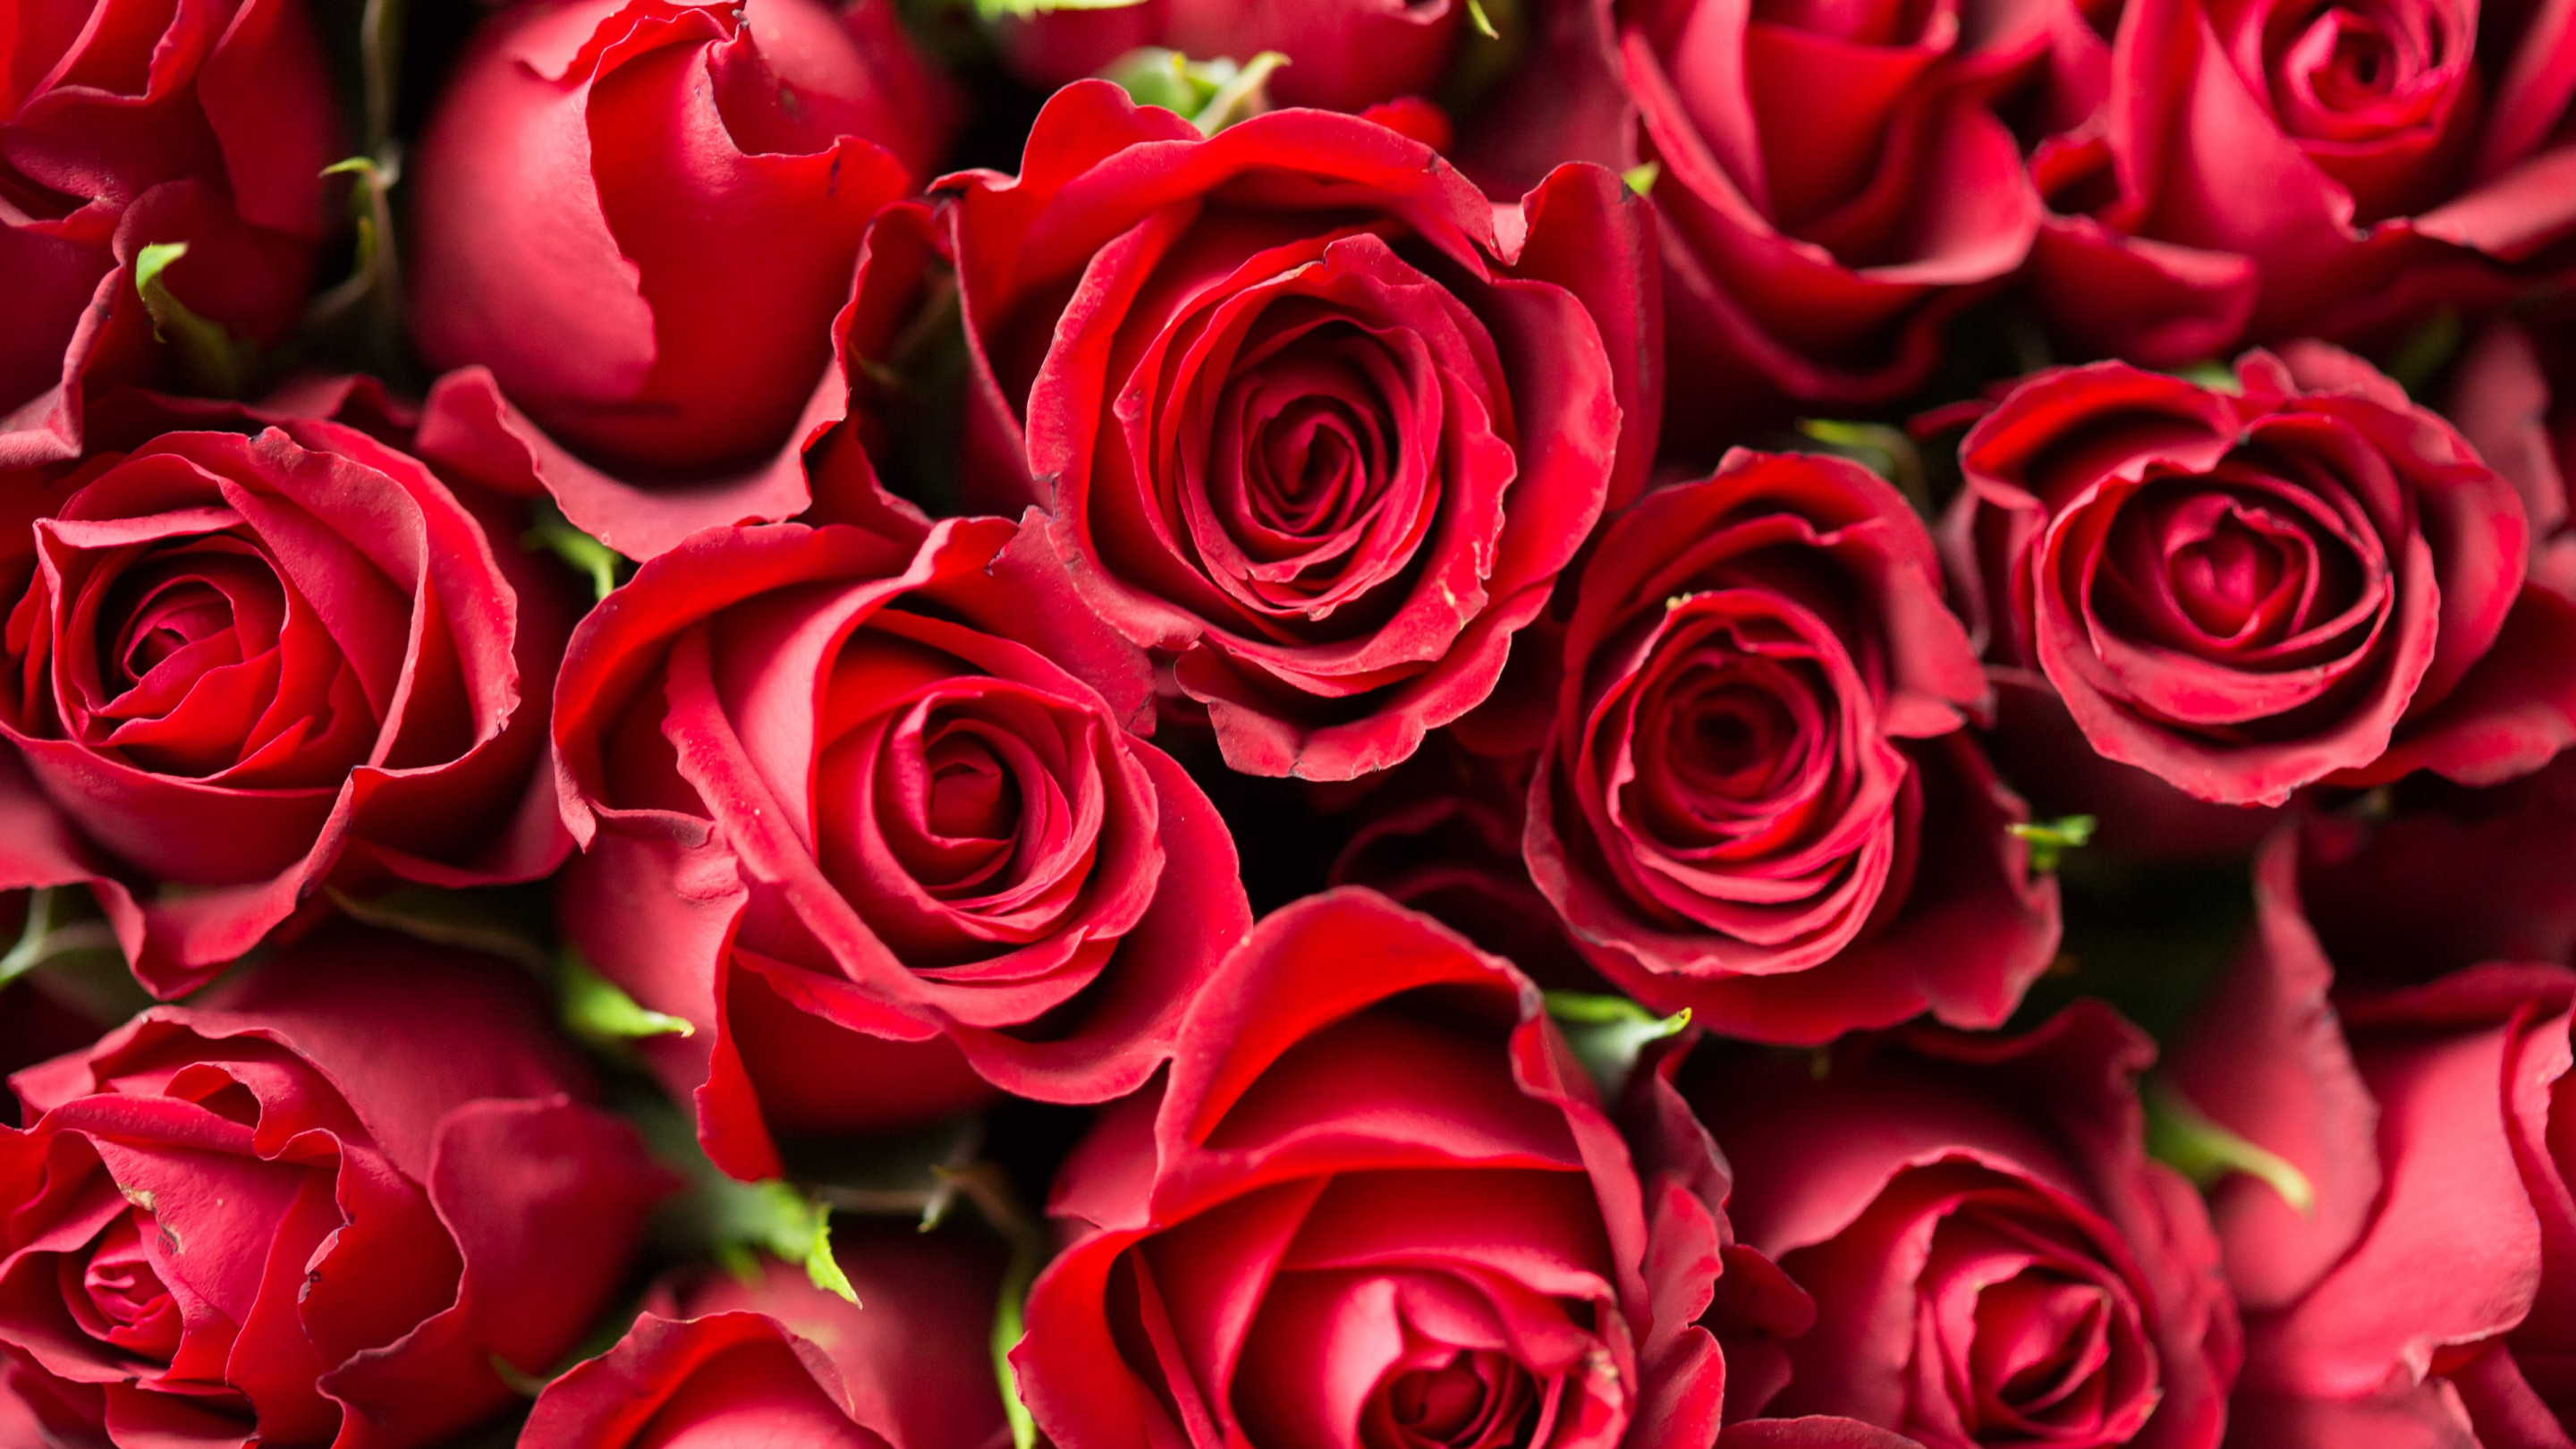 Lots of red roses wallpaper 2880x1620